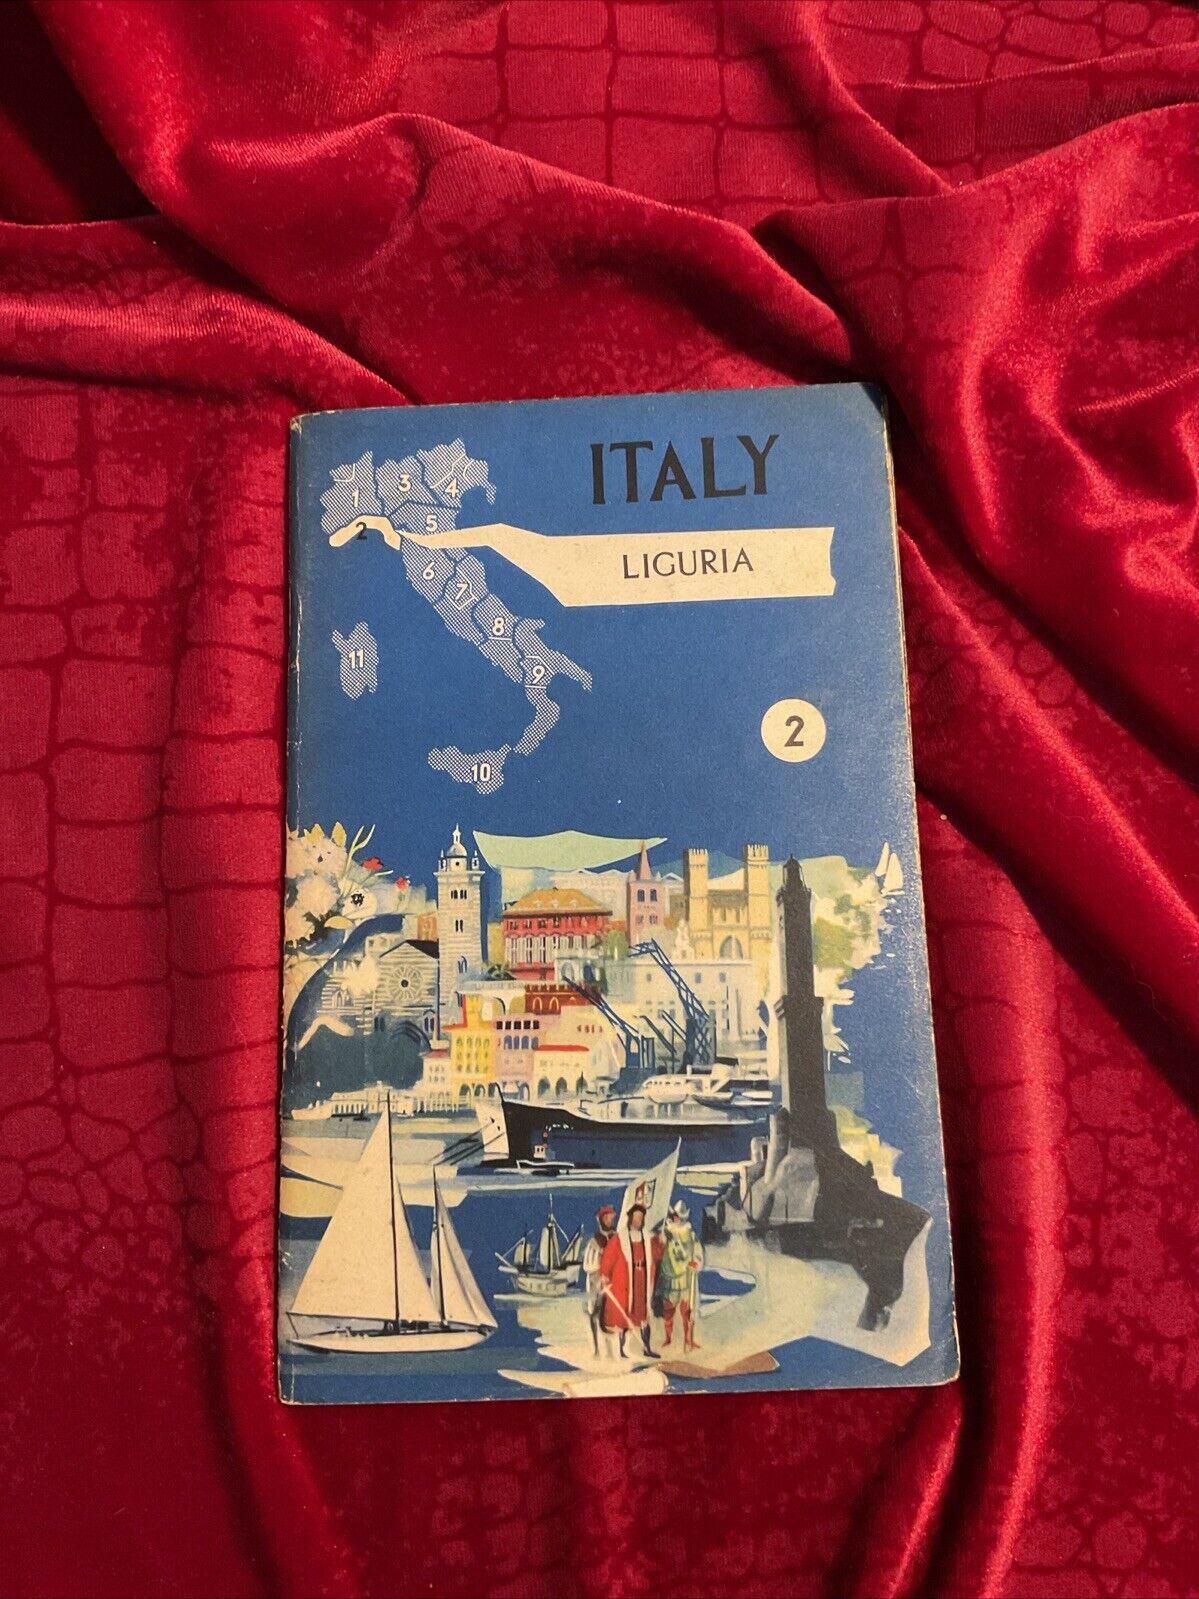 Italy;  Liguria, no 2 Guide,  Vintage  printed 1958 with maps